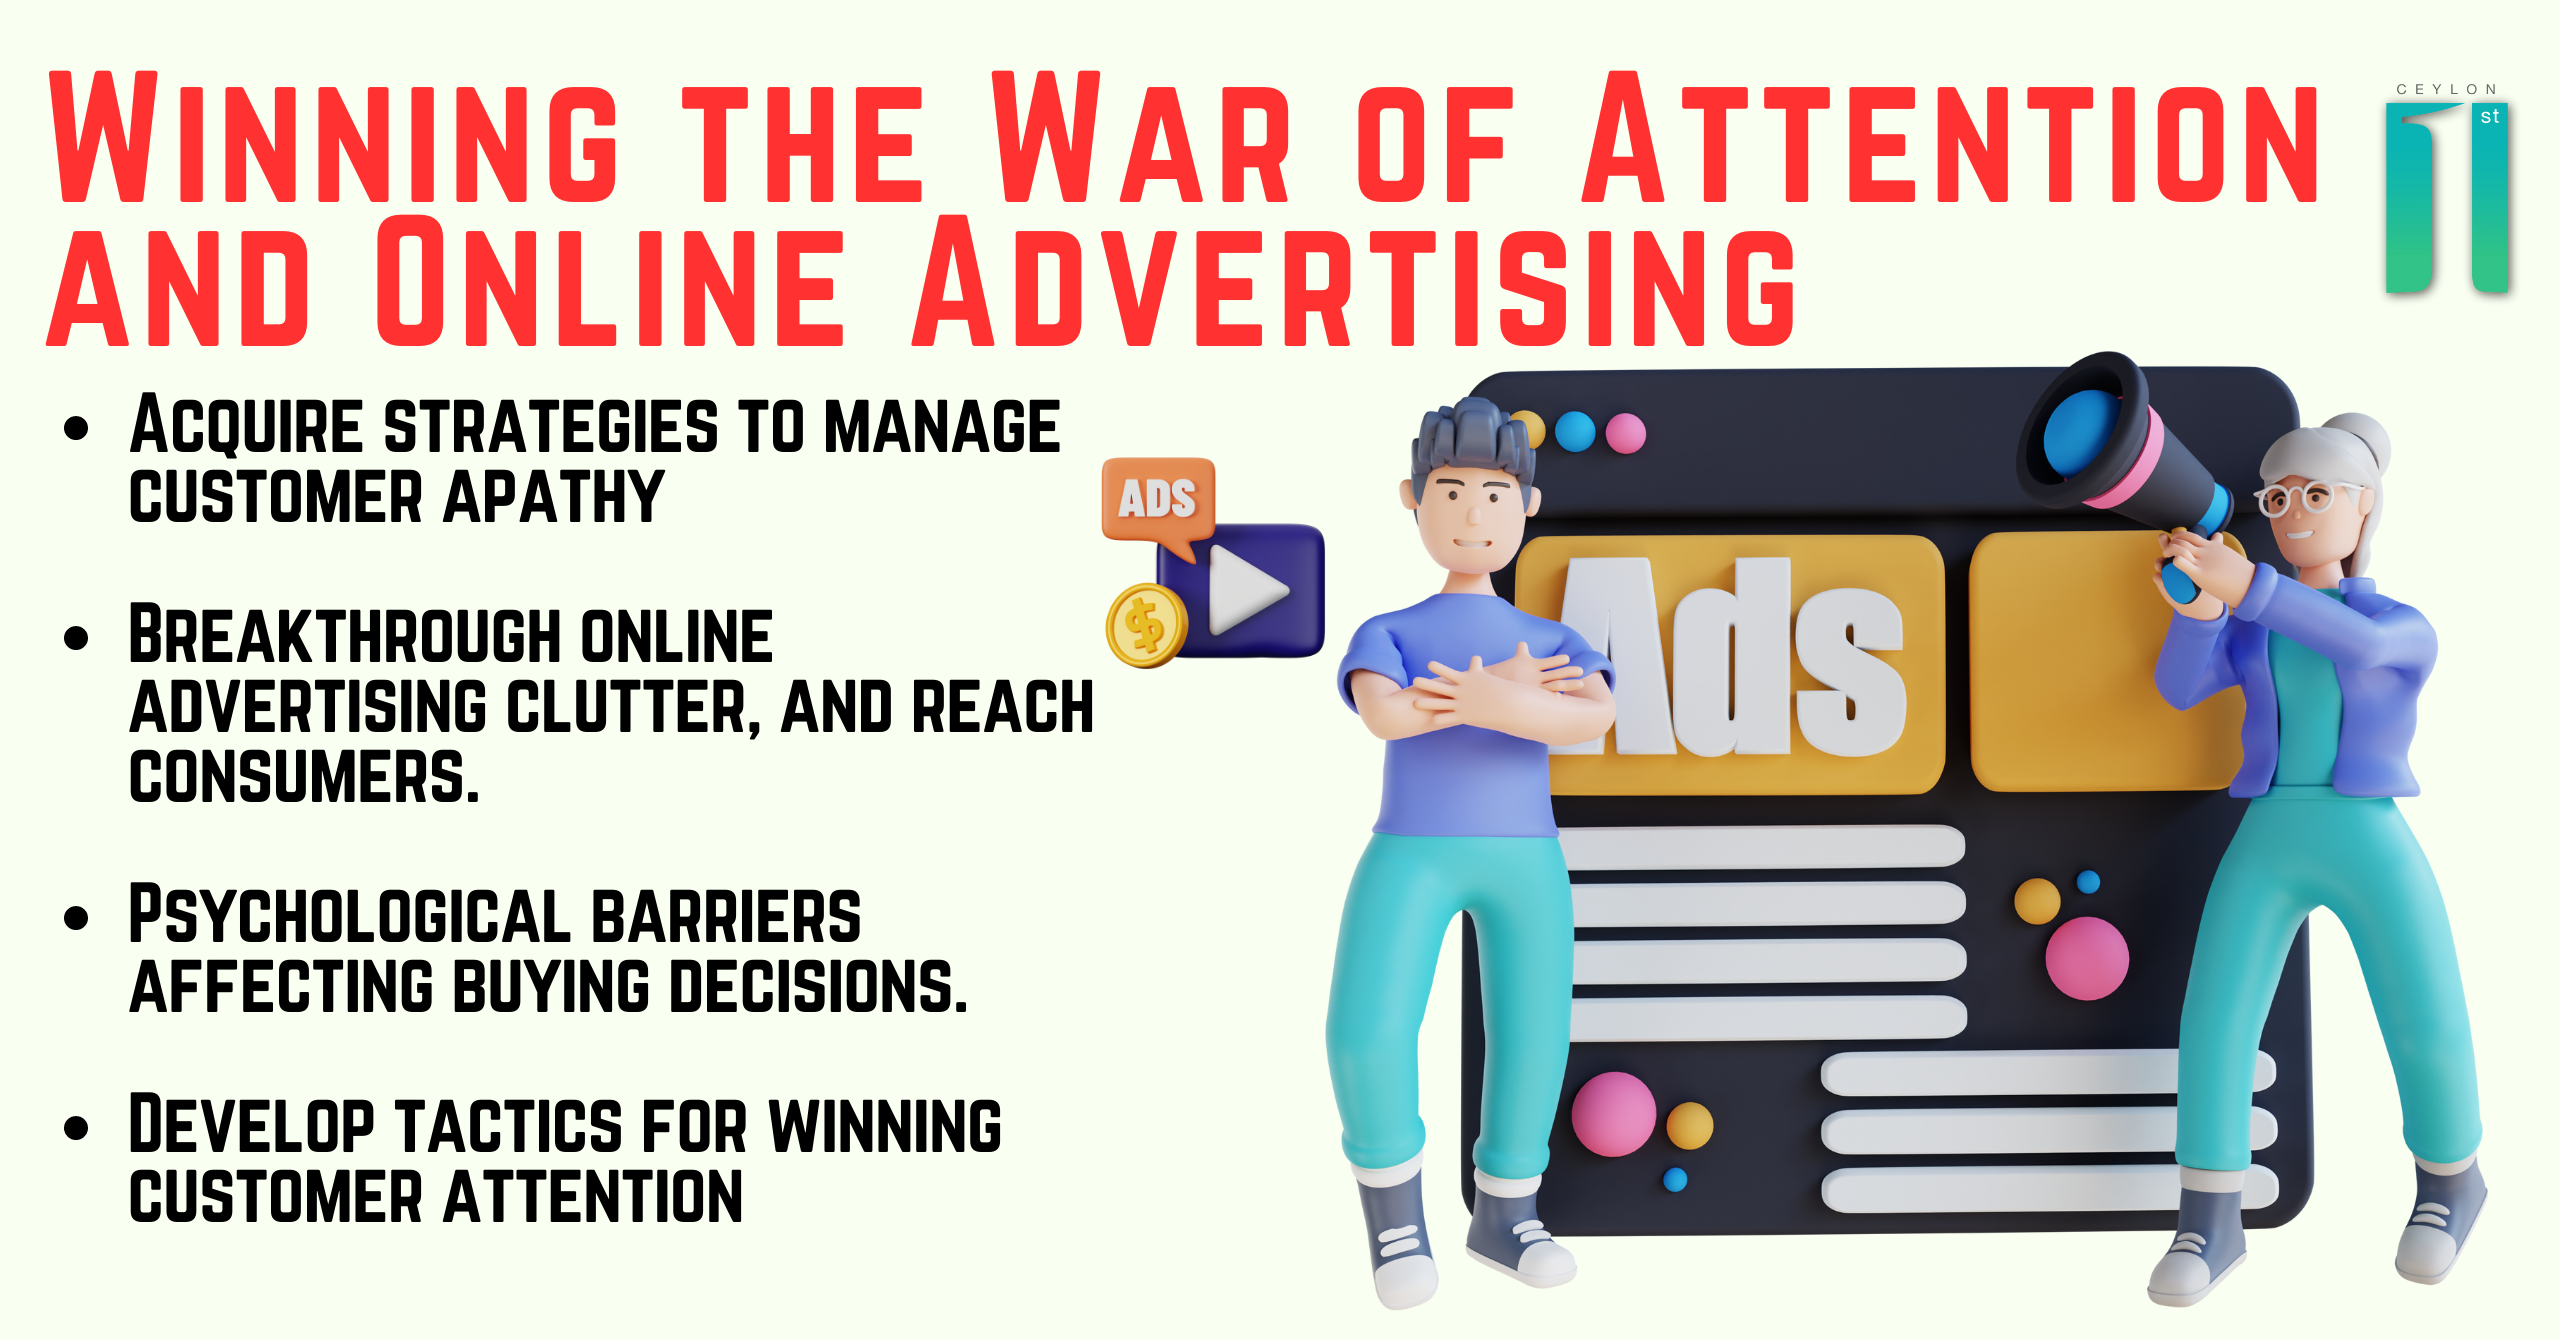 Winning the War of Attention and Online Advertising